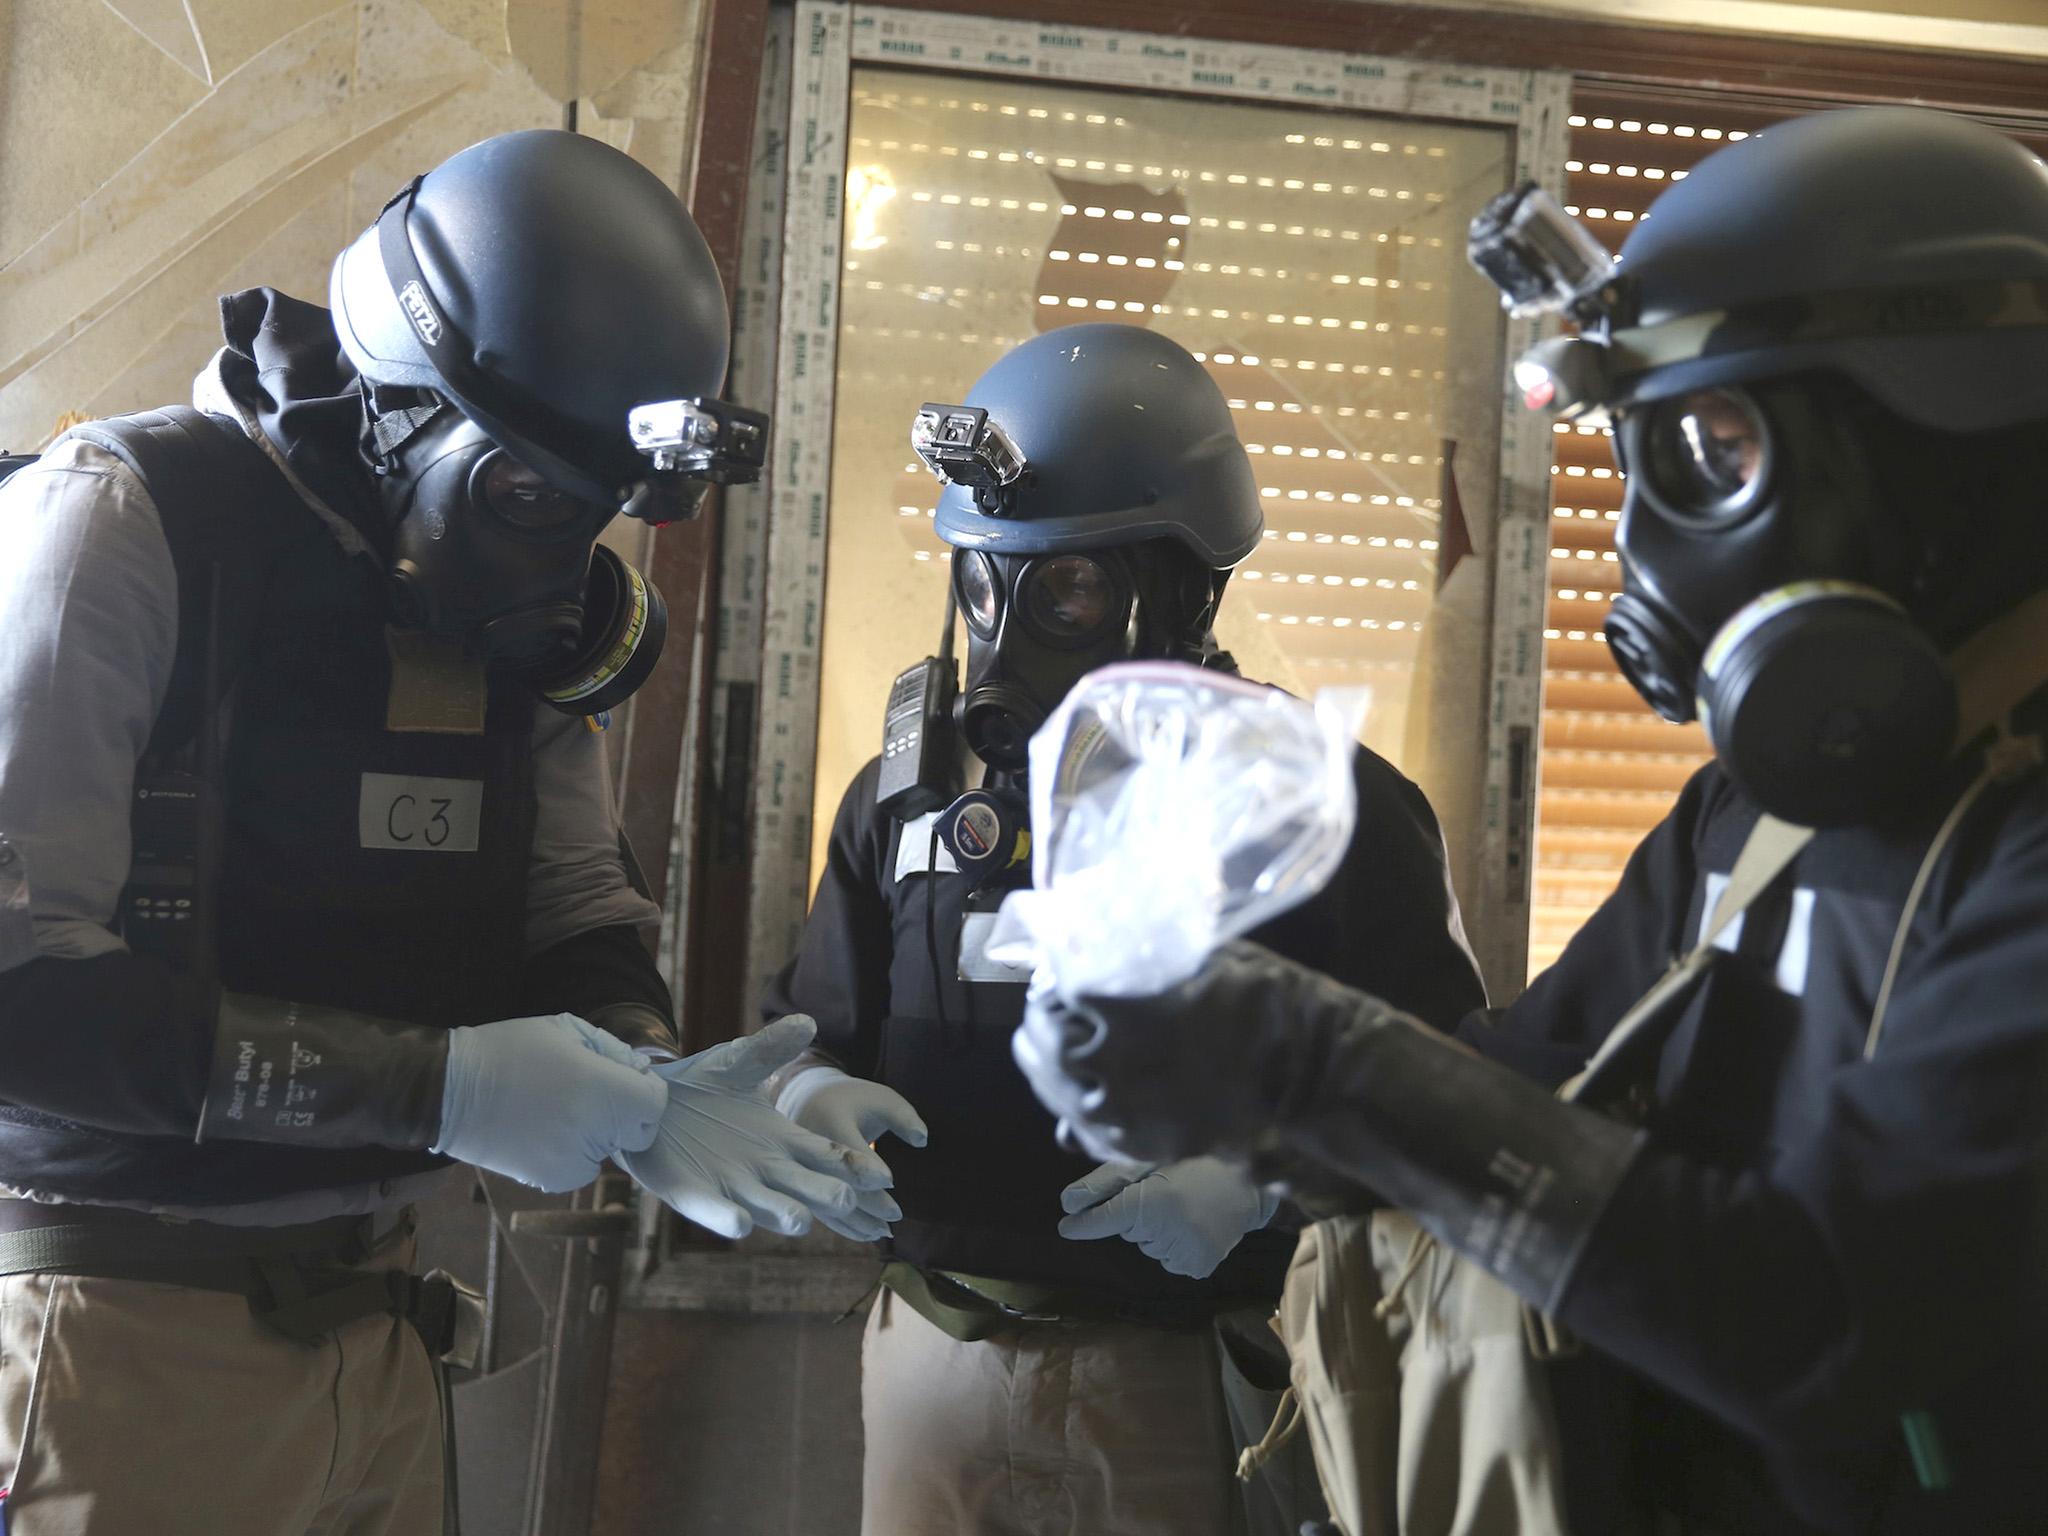 UN chemical weapons experts inspect the scene following a toxic gas attack in eastern Ghouta in August 2013